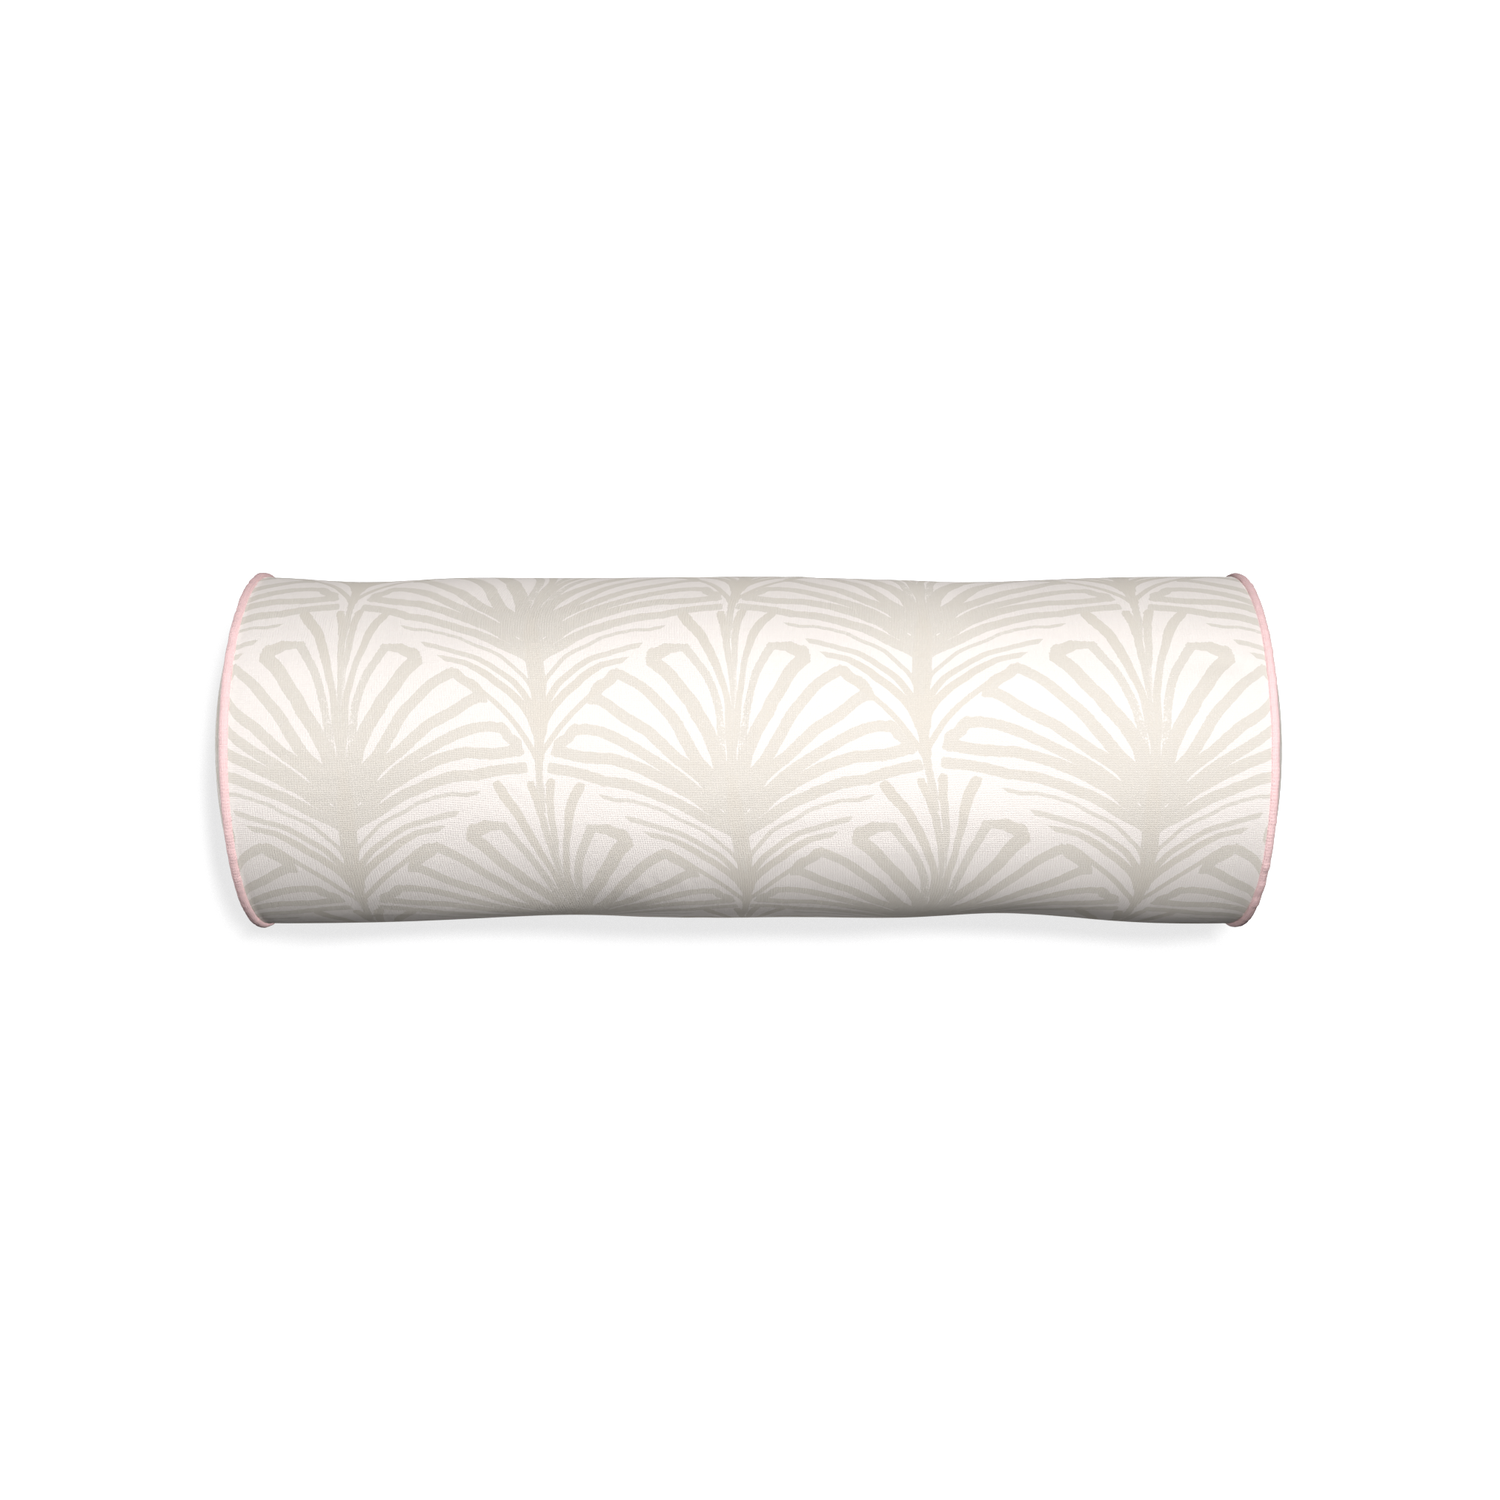 Bolster suzy sand custom pillow with petal piping on white background